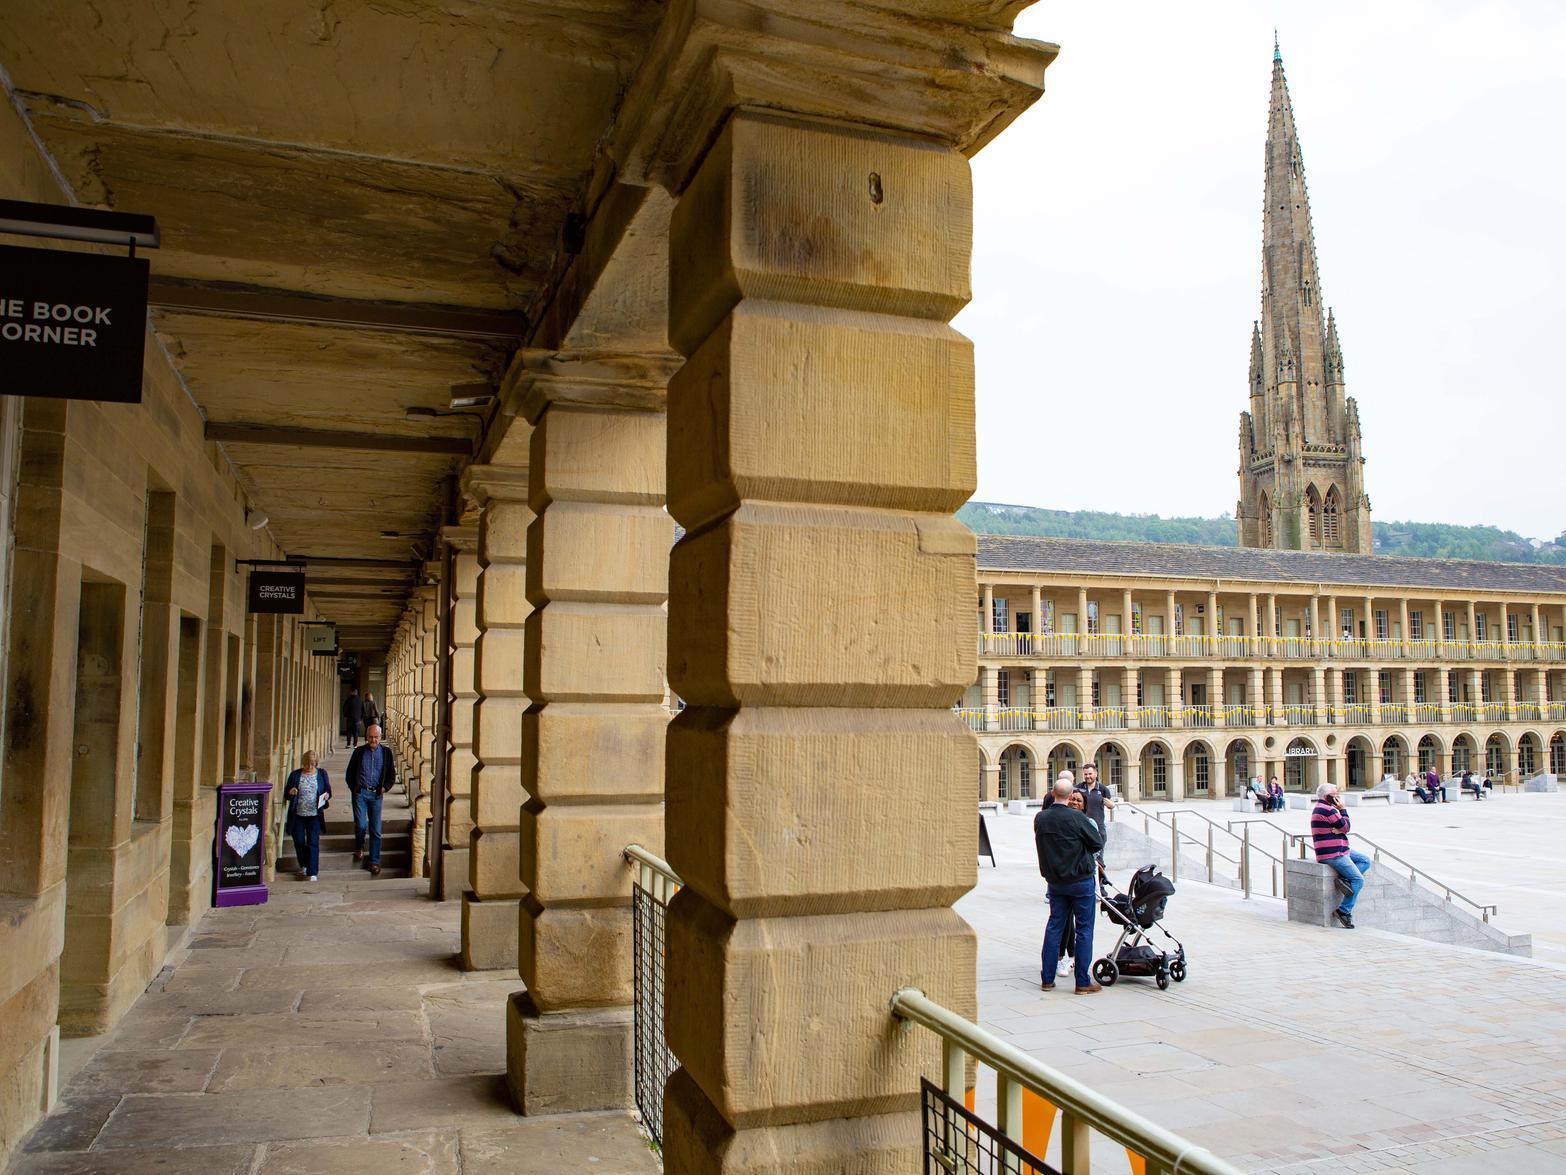 Popular with tourists and residents alike, The Piece Hall is a major attraction in Halifax town centre. With shops to browse, restaurants to visit and plenty of events taking place throughout the year theres lots to see and do.